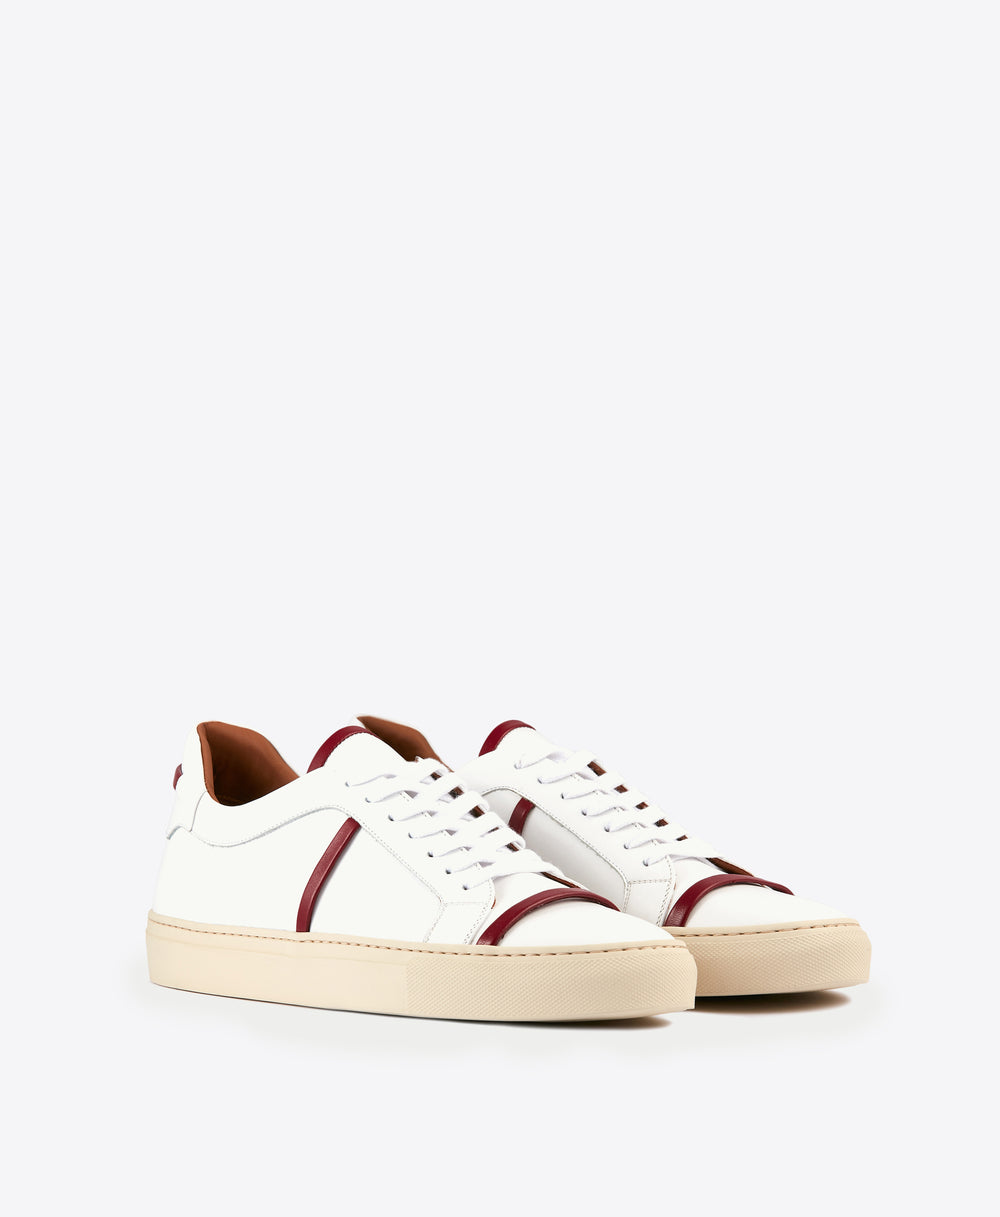 Men's White and Red Leather Sneakers Malone Souliers